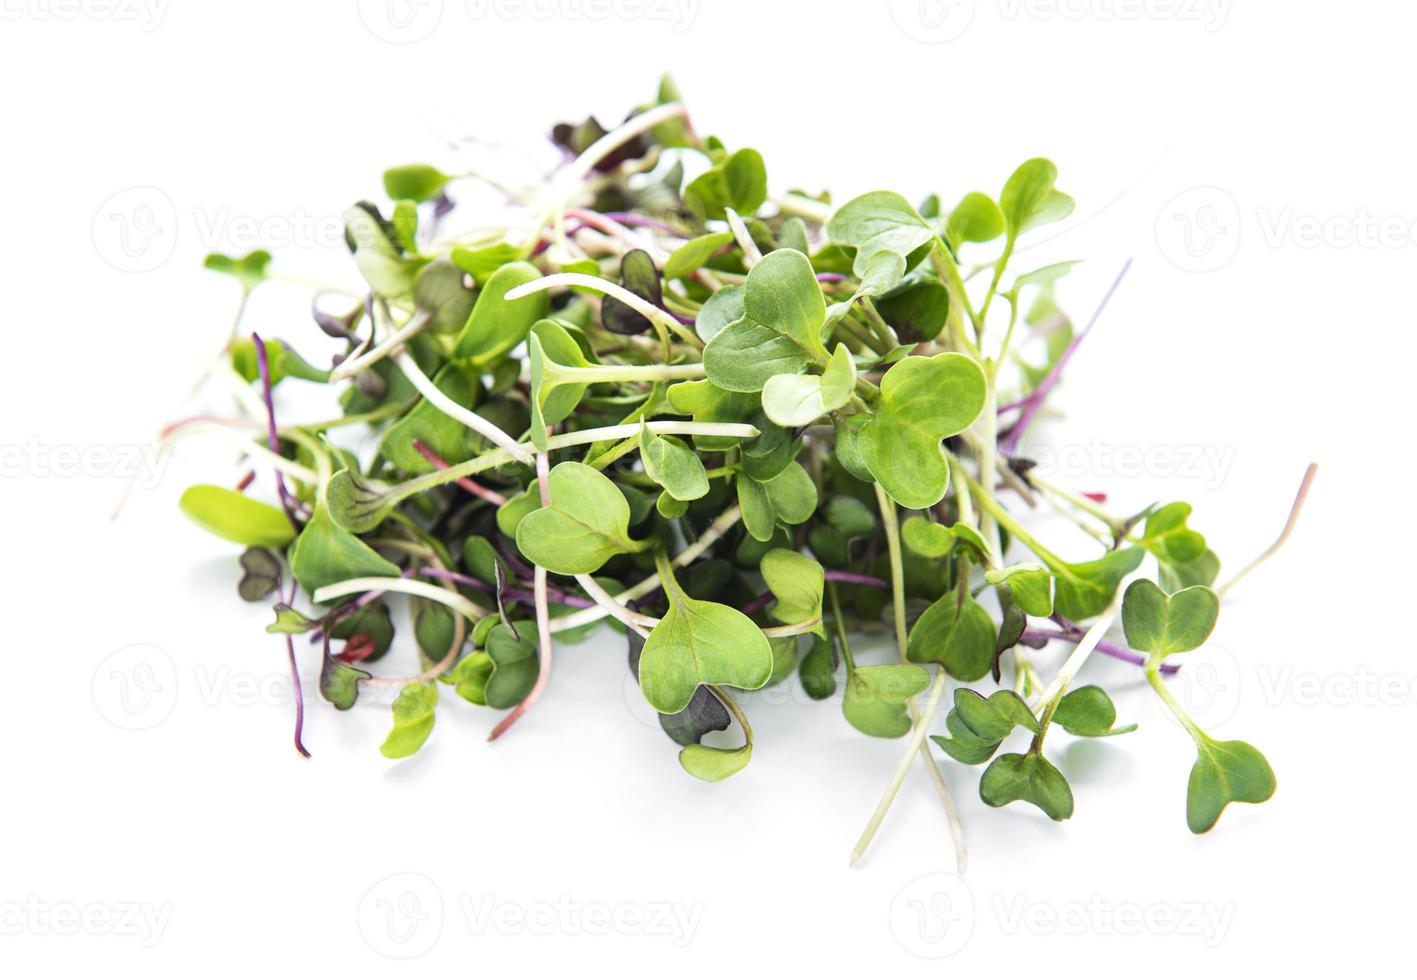 Heap of radish micro greens on white background. Healthy eating concept. photo